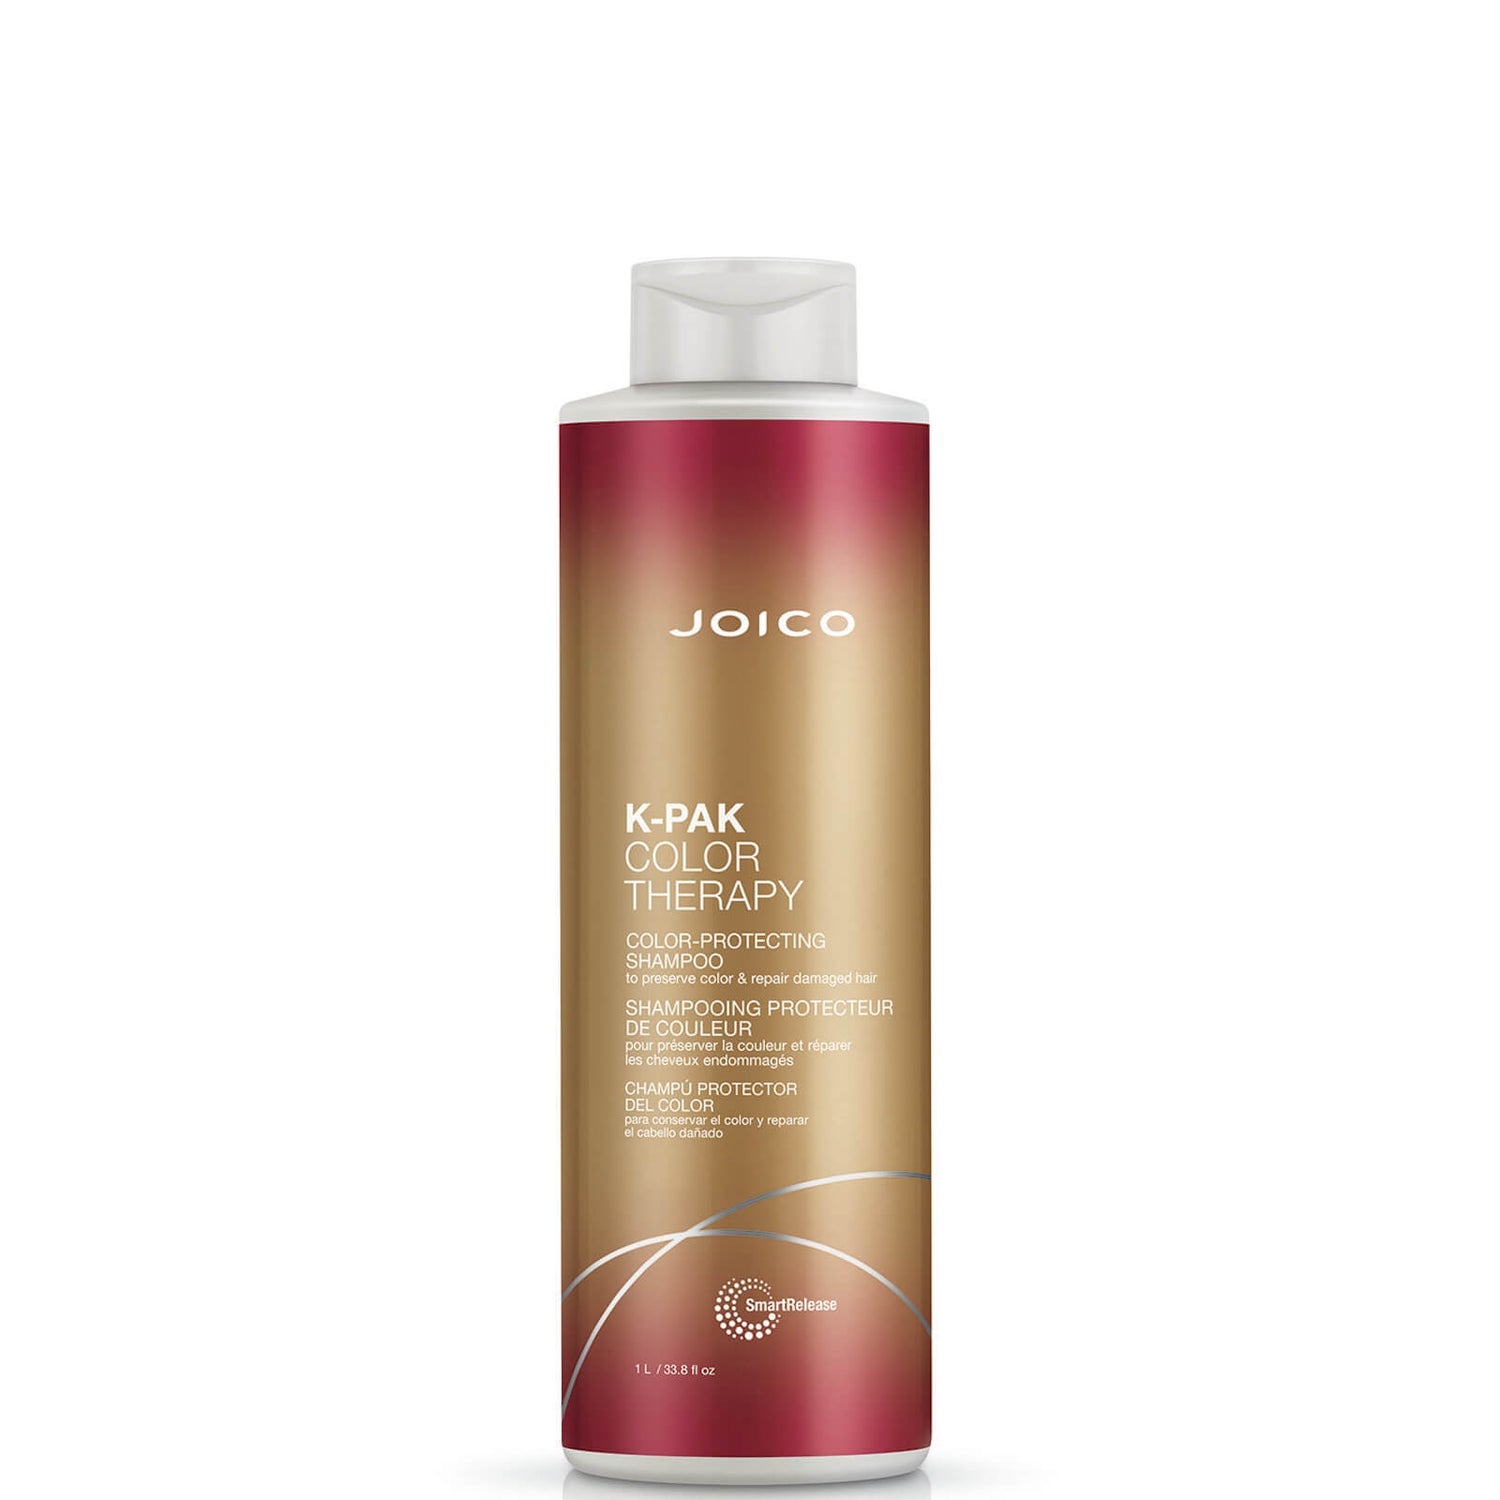 Joico K-Pak Color Therapy Color-Protecting Shampoo 1000ml (Worth £58.33)